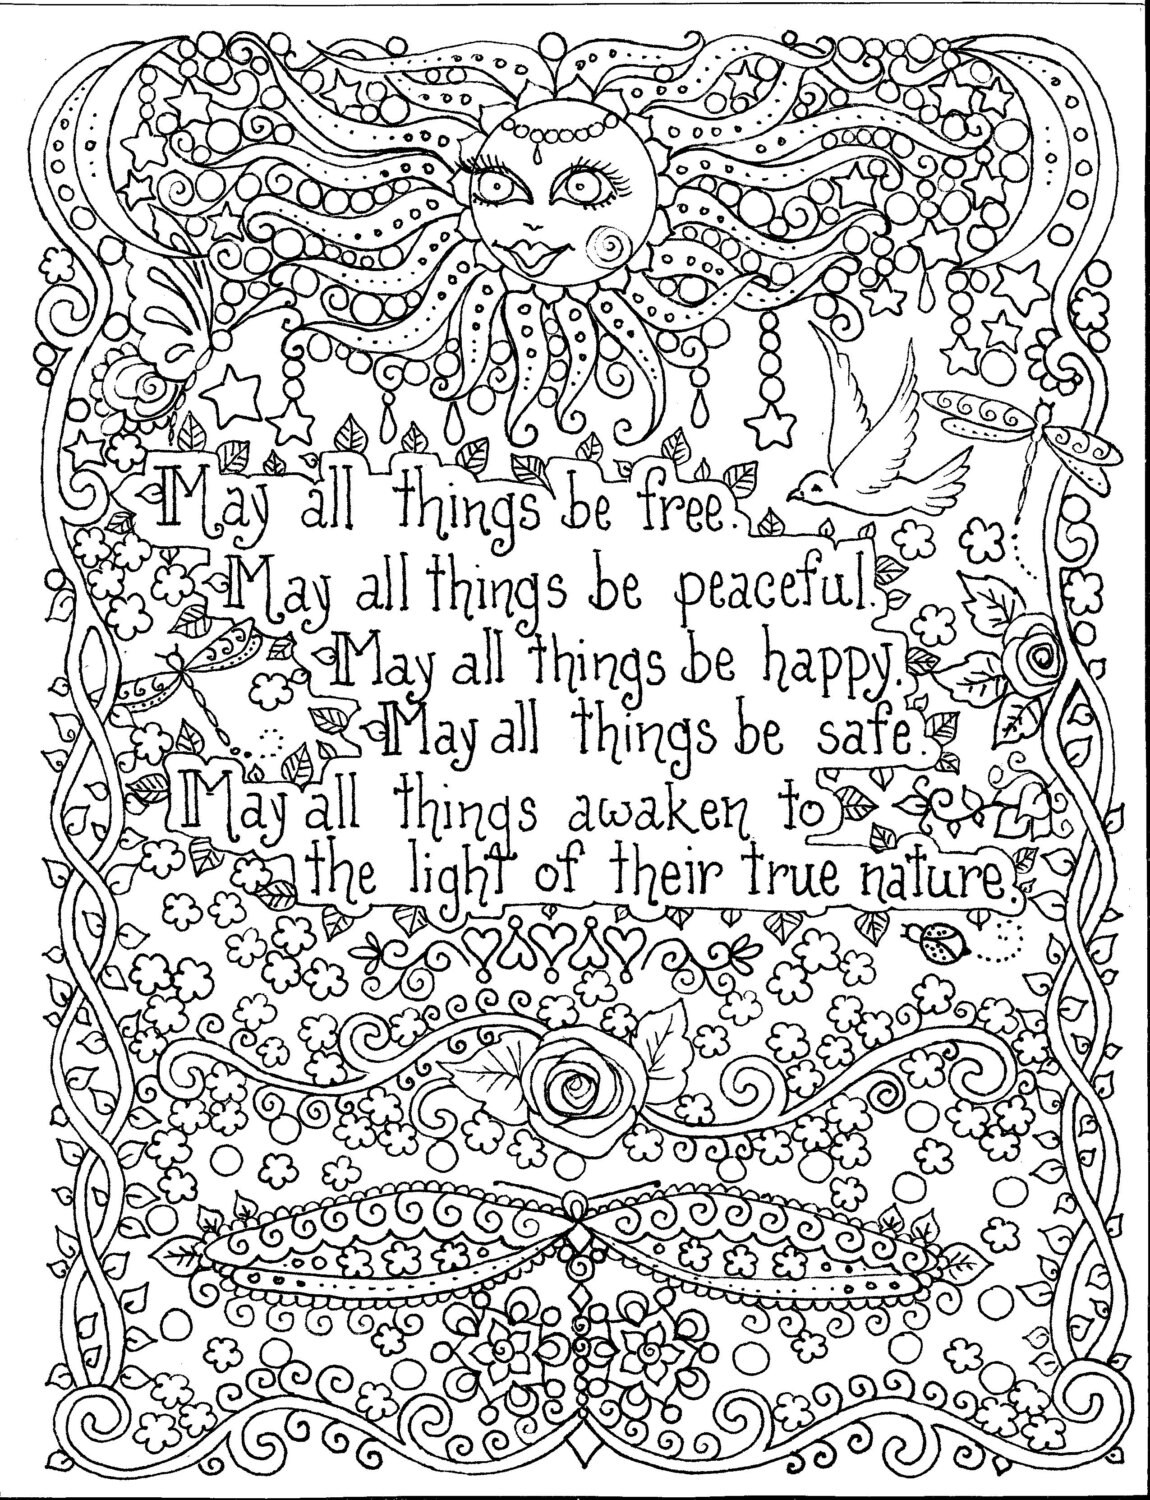 Download INSTANT Download Coloring Page 8 1/2 x 11 May all things be